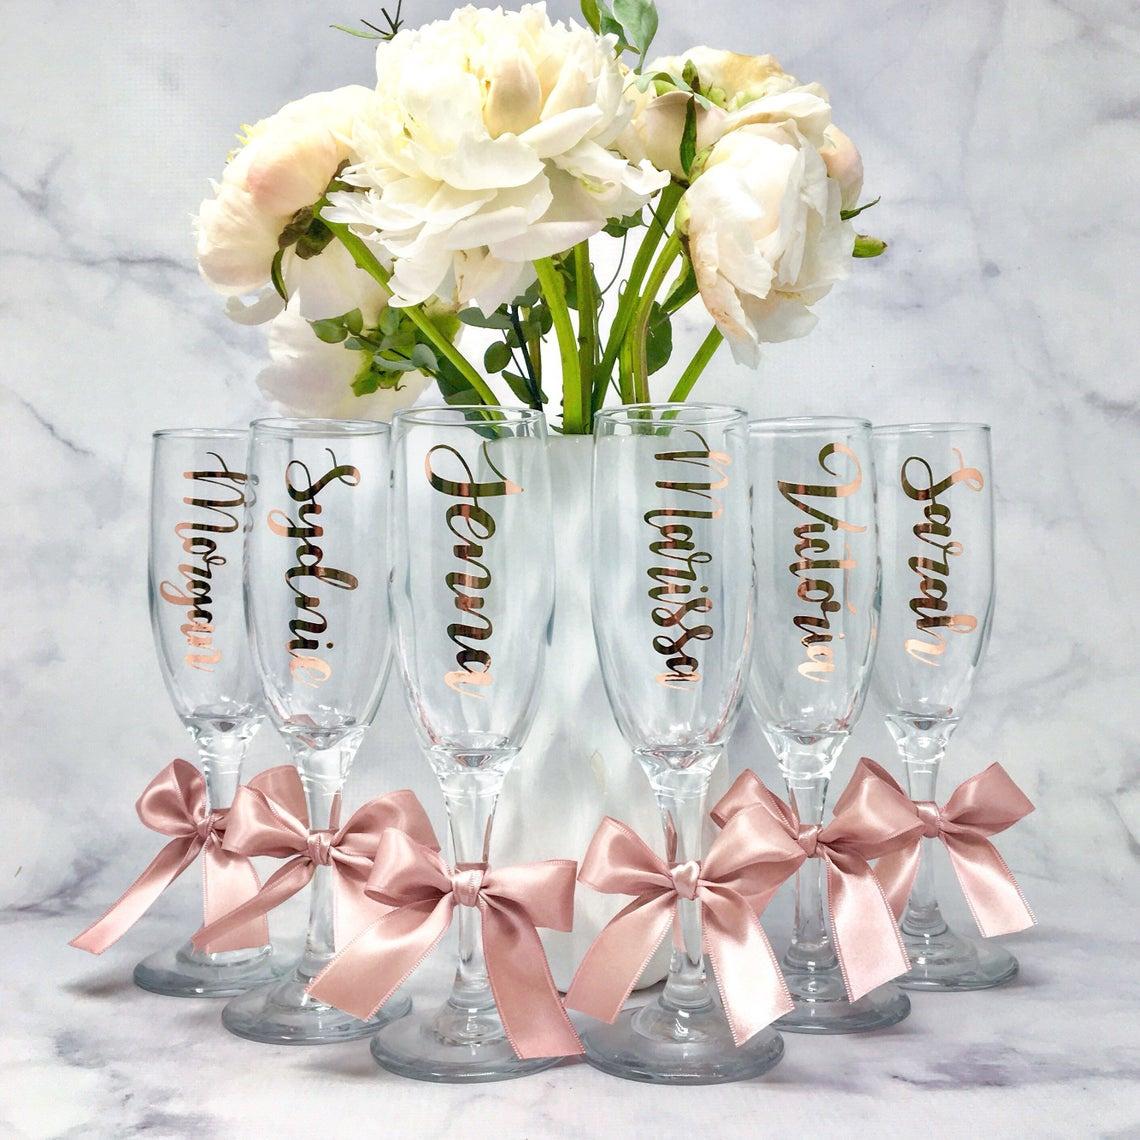 27 Bachelorette Party Favors That Are Fun & Affordable